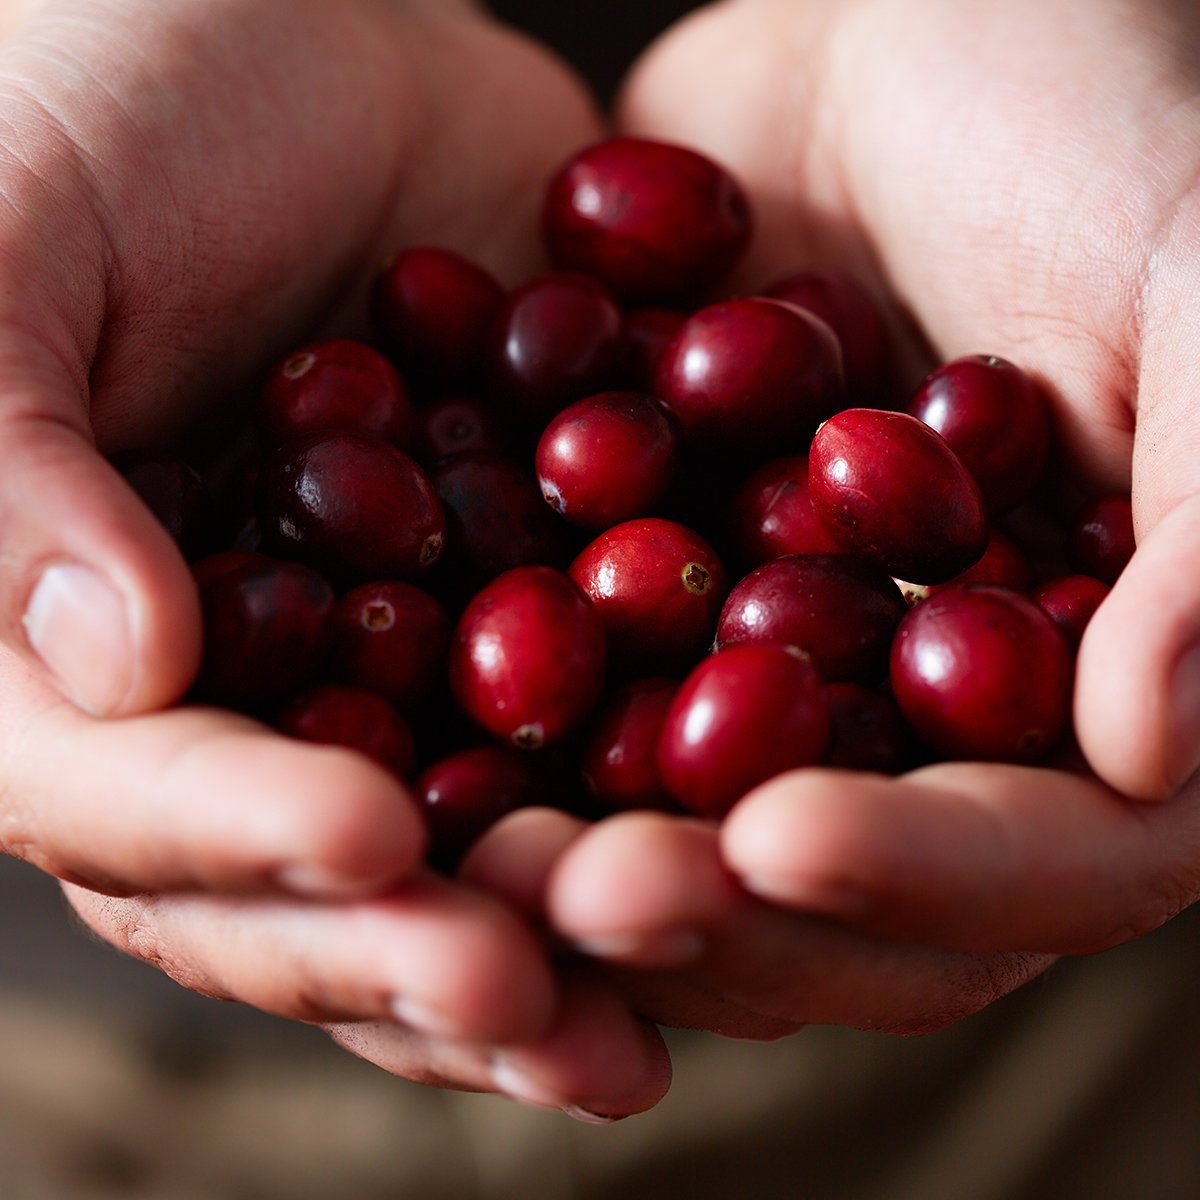 Hands of unrecognizable person holding juicy sweet freshly picked cranberries, extreme close-up view